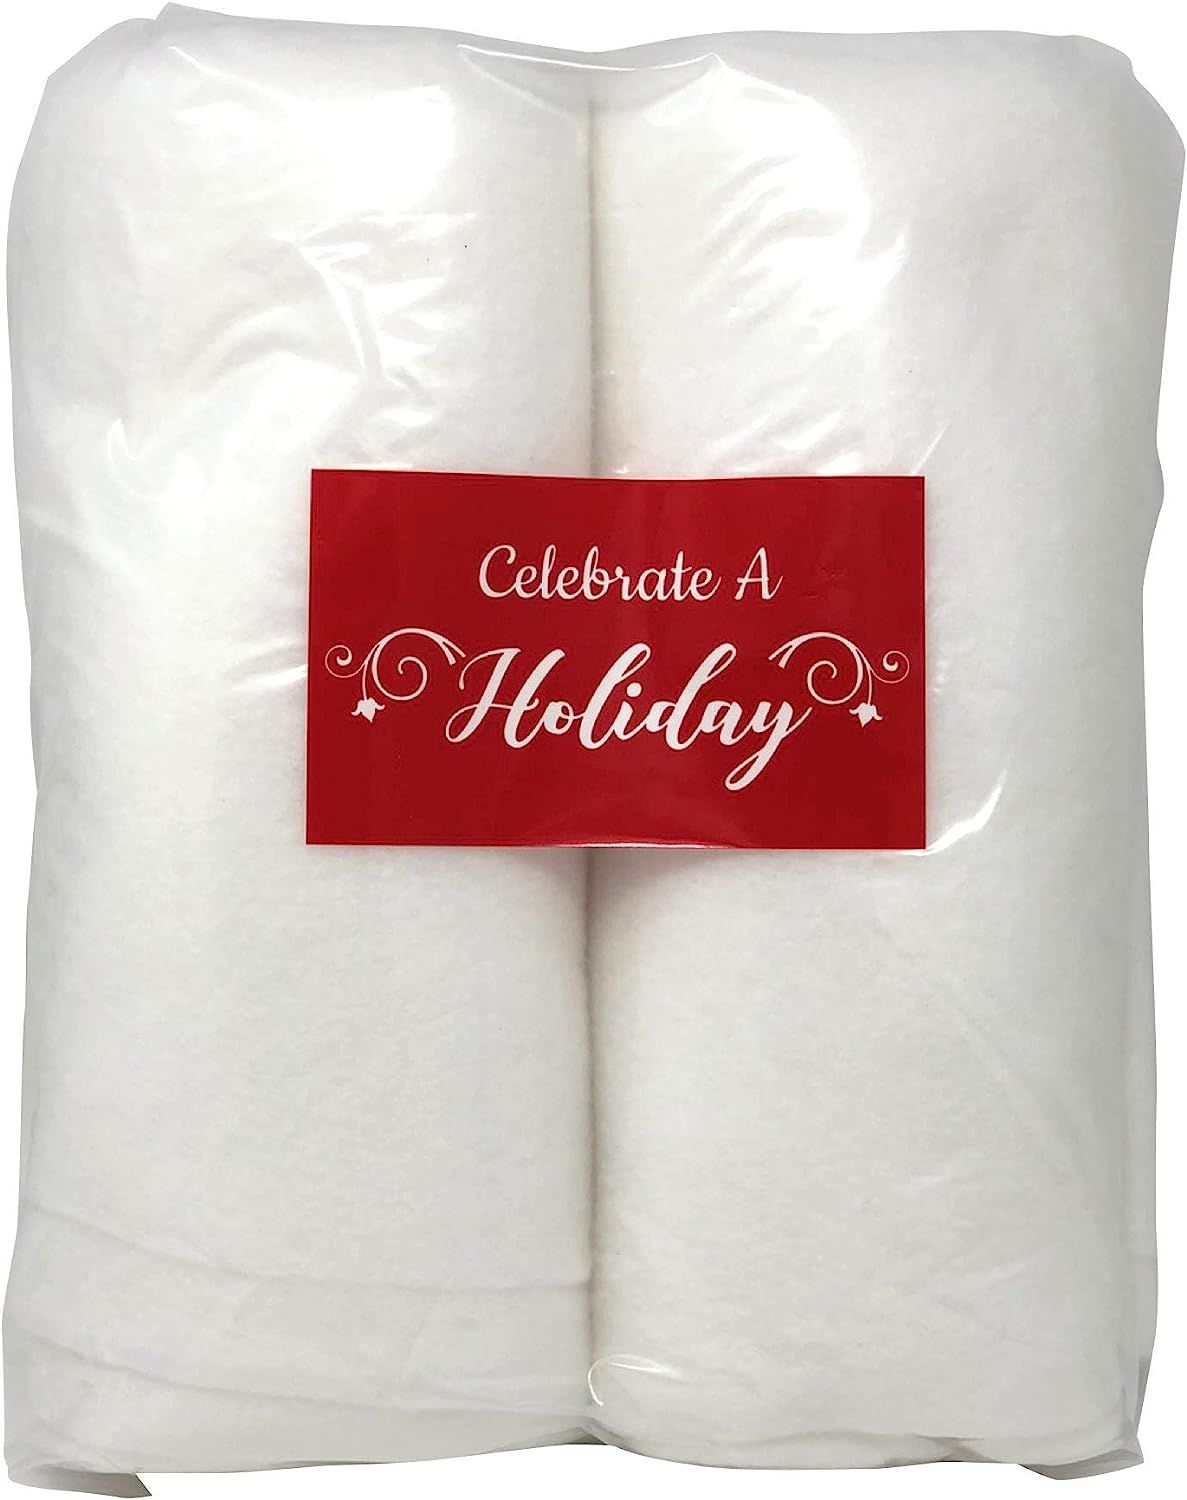 Celebrate A Holiday Christmas Snow Roll - 2 Packages of 3 Foot X 8 Foot Artificial Snow Blankets ... | Amazon (US)